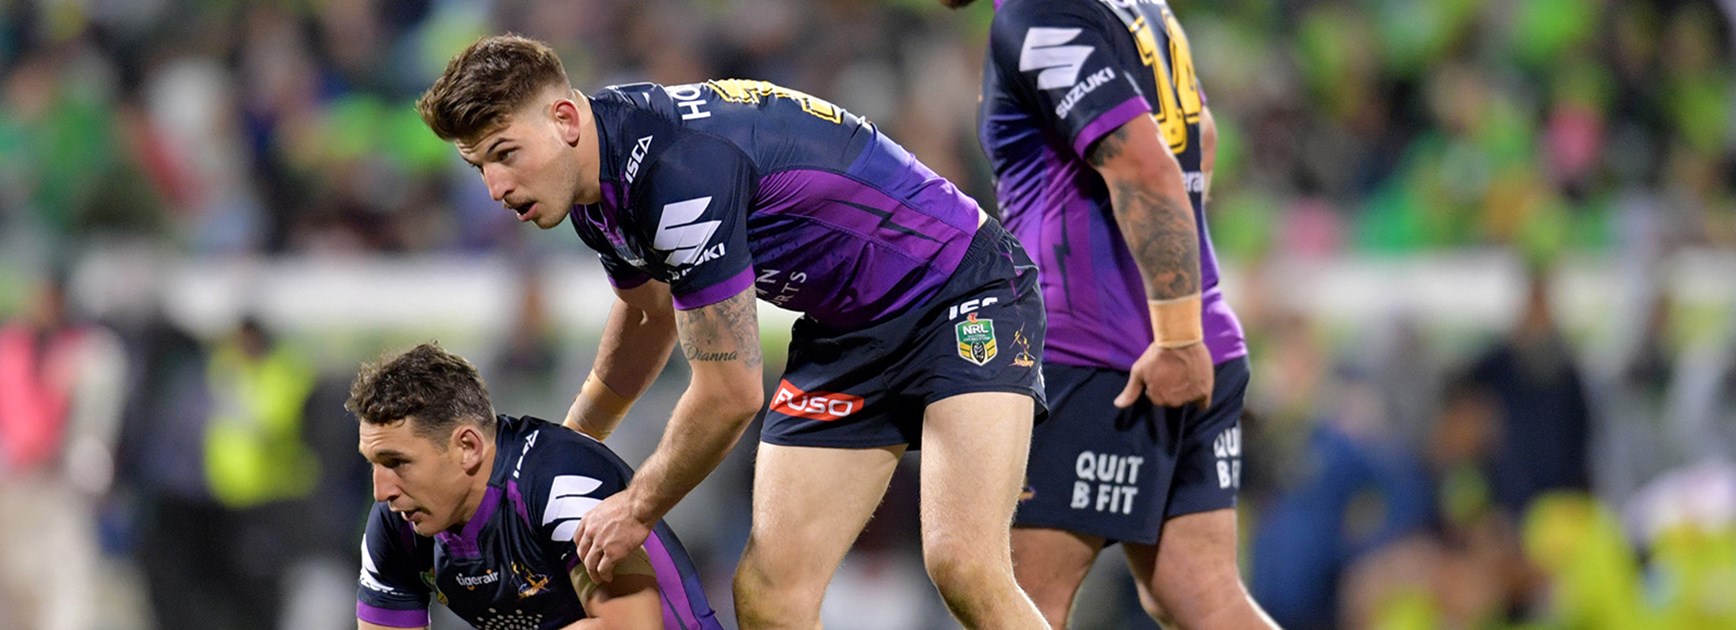 Smith and Slater in doubt: Cronk